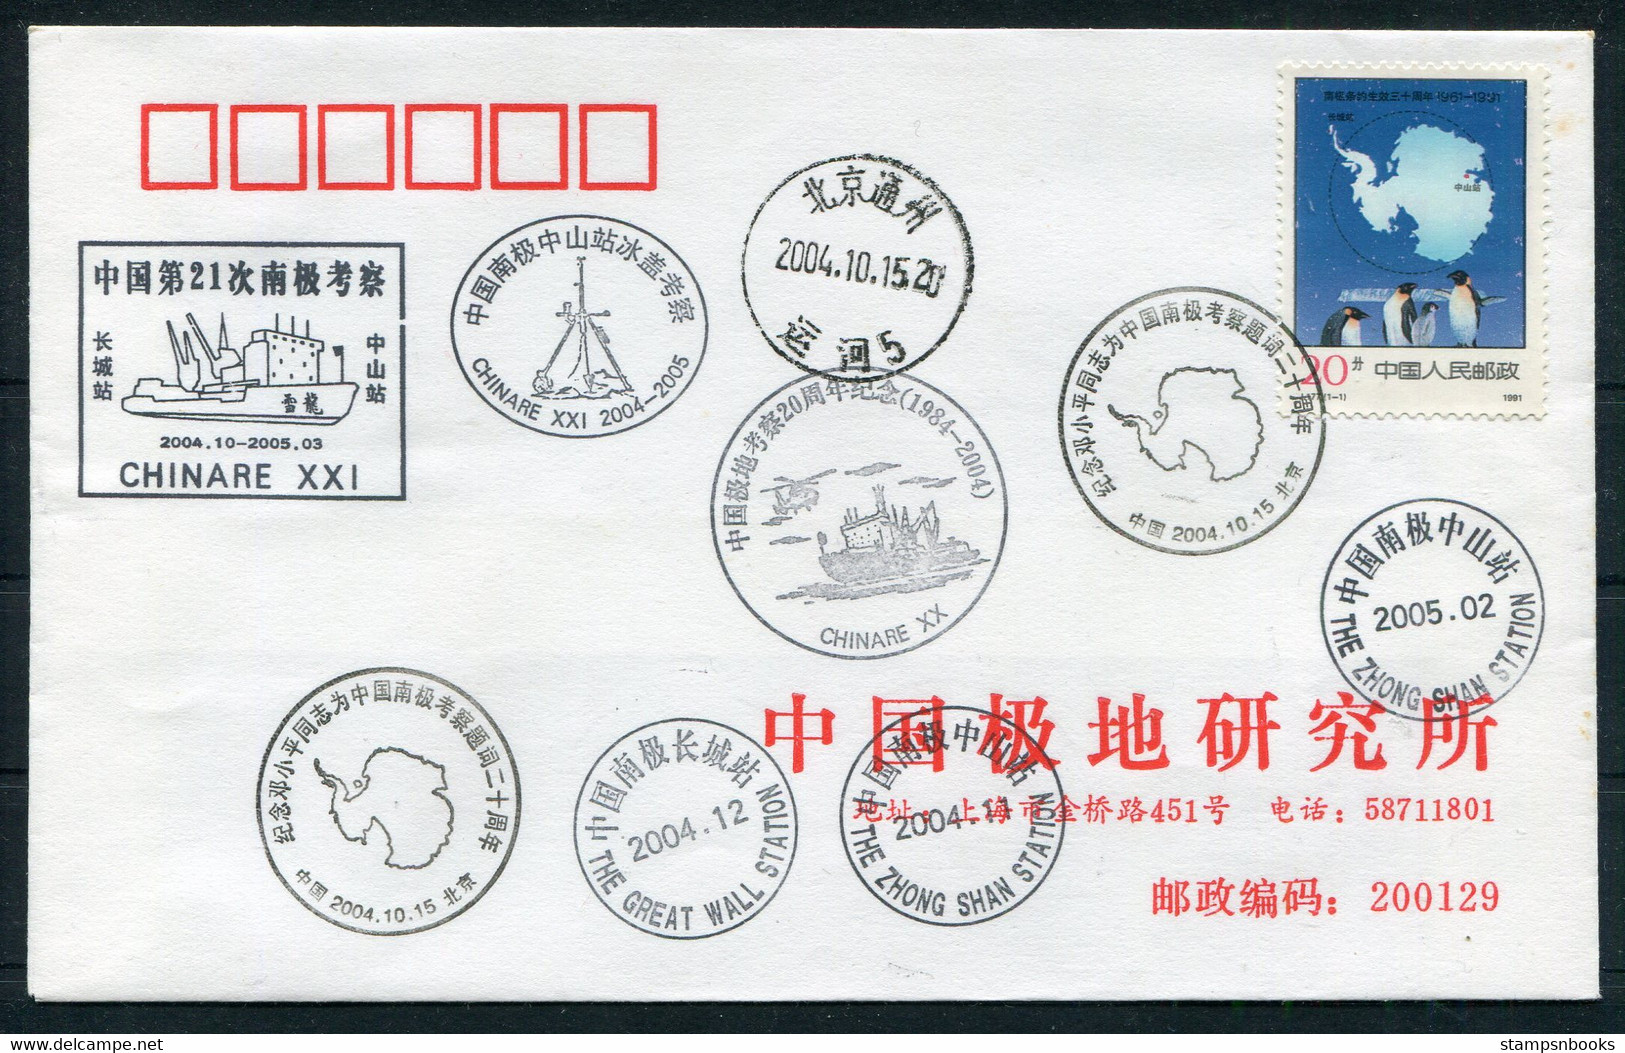 2004-5 China Antarctica CHINARE 21 Expedition, Great Wall Station + Zhong Shan Station, Penguin Cover - Covers & Documents